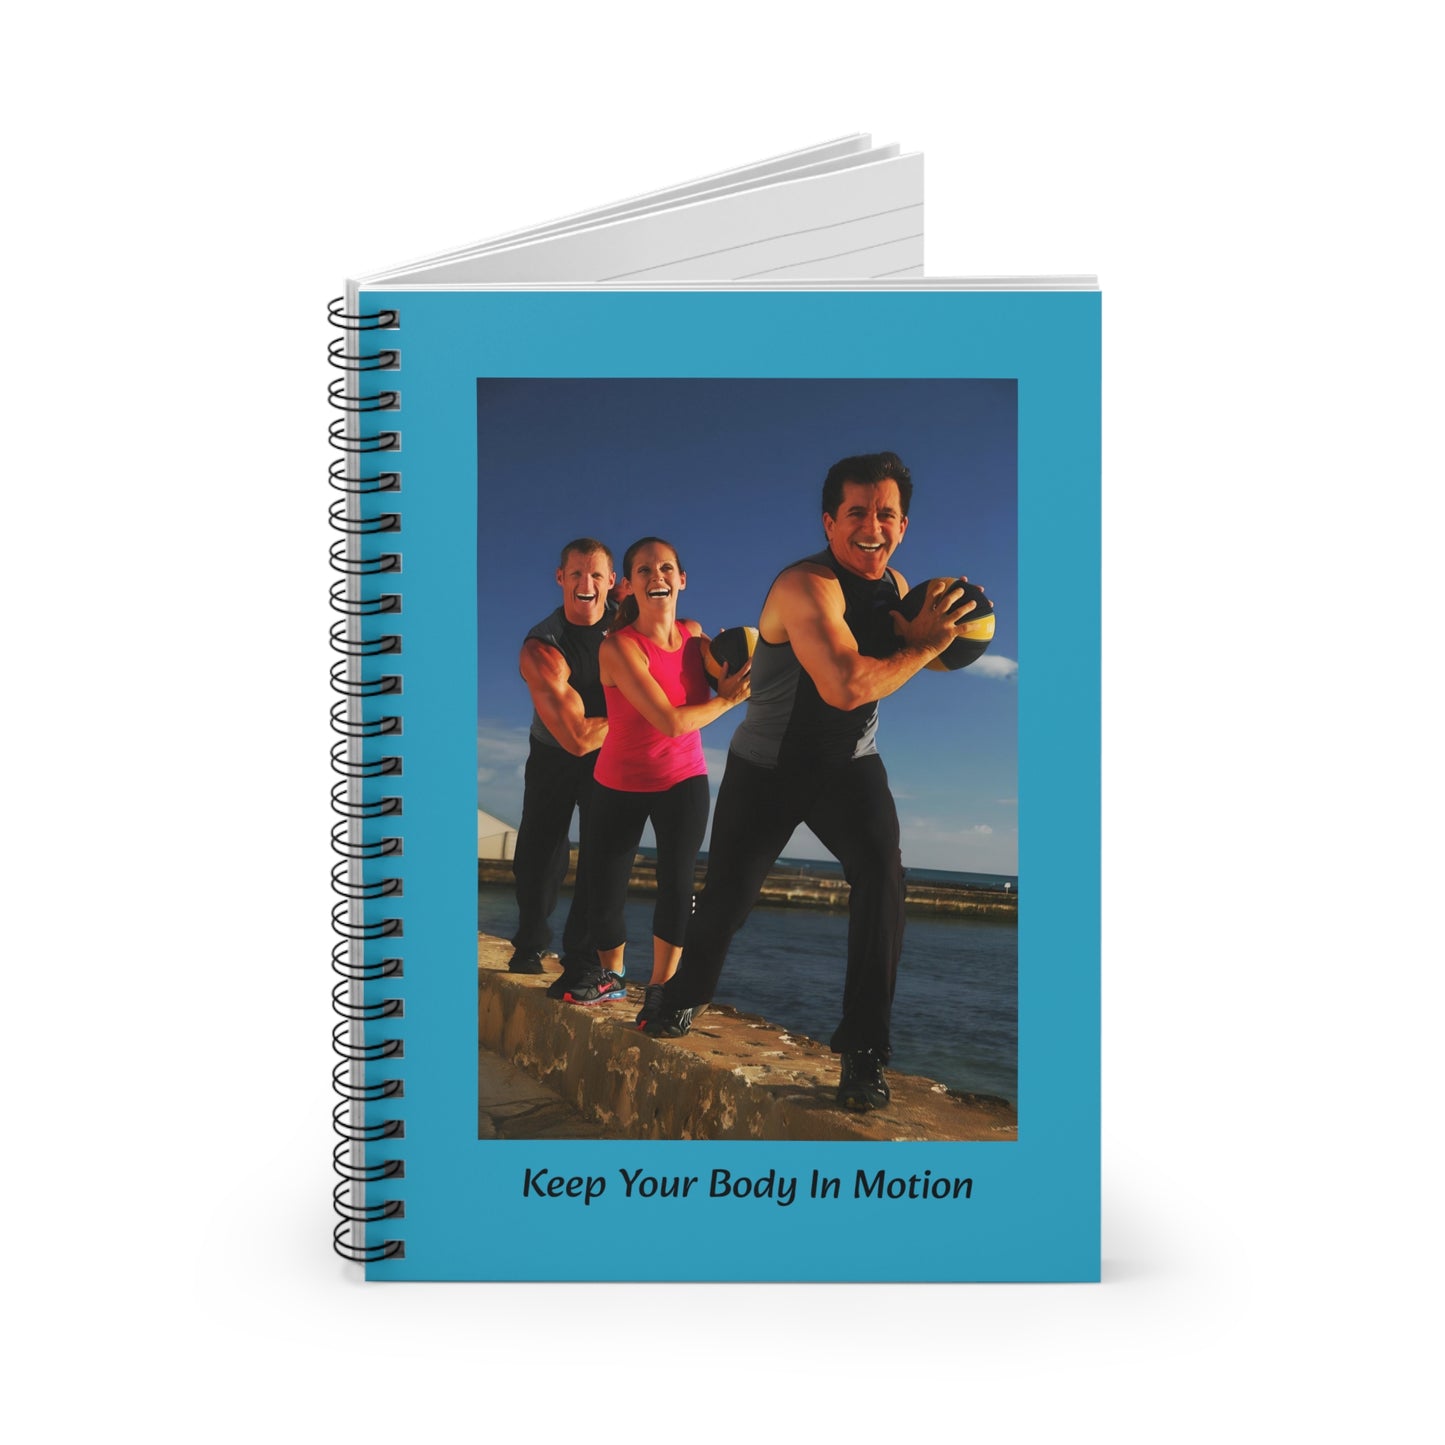 Bodies in Motion Fitness Journal Spiral Notebook - Ruled Line